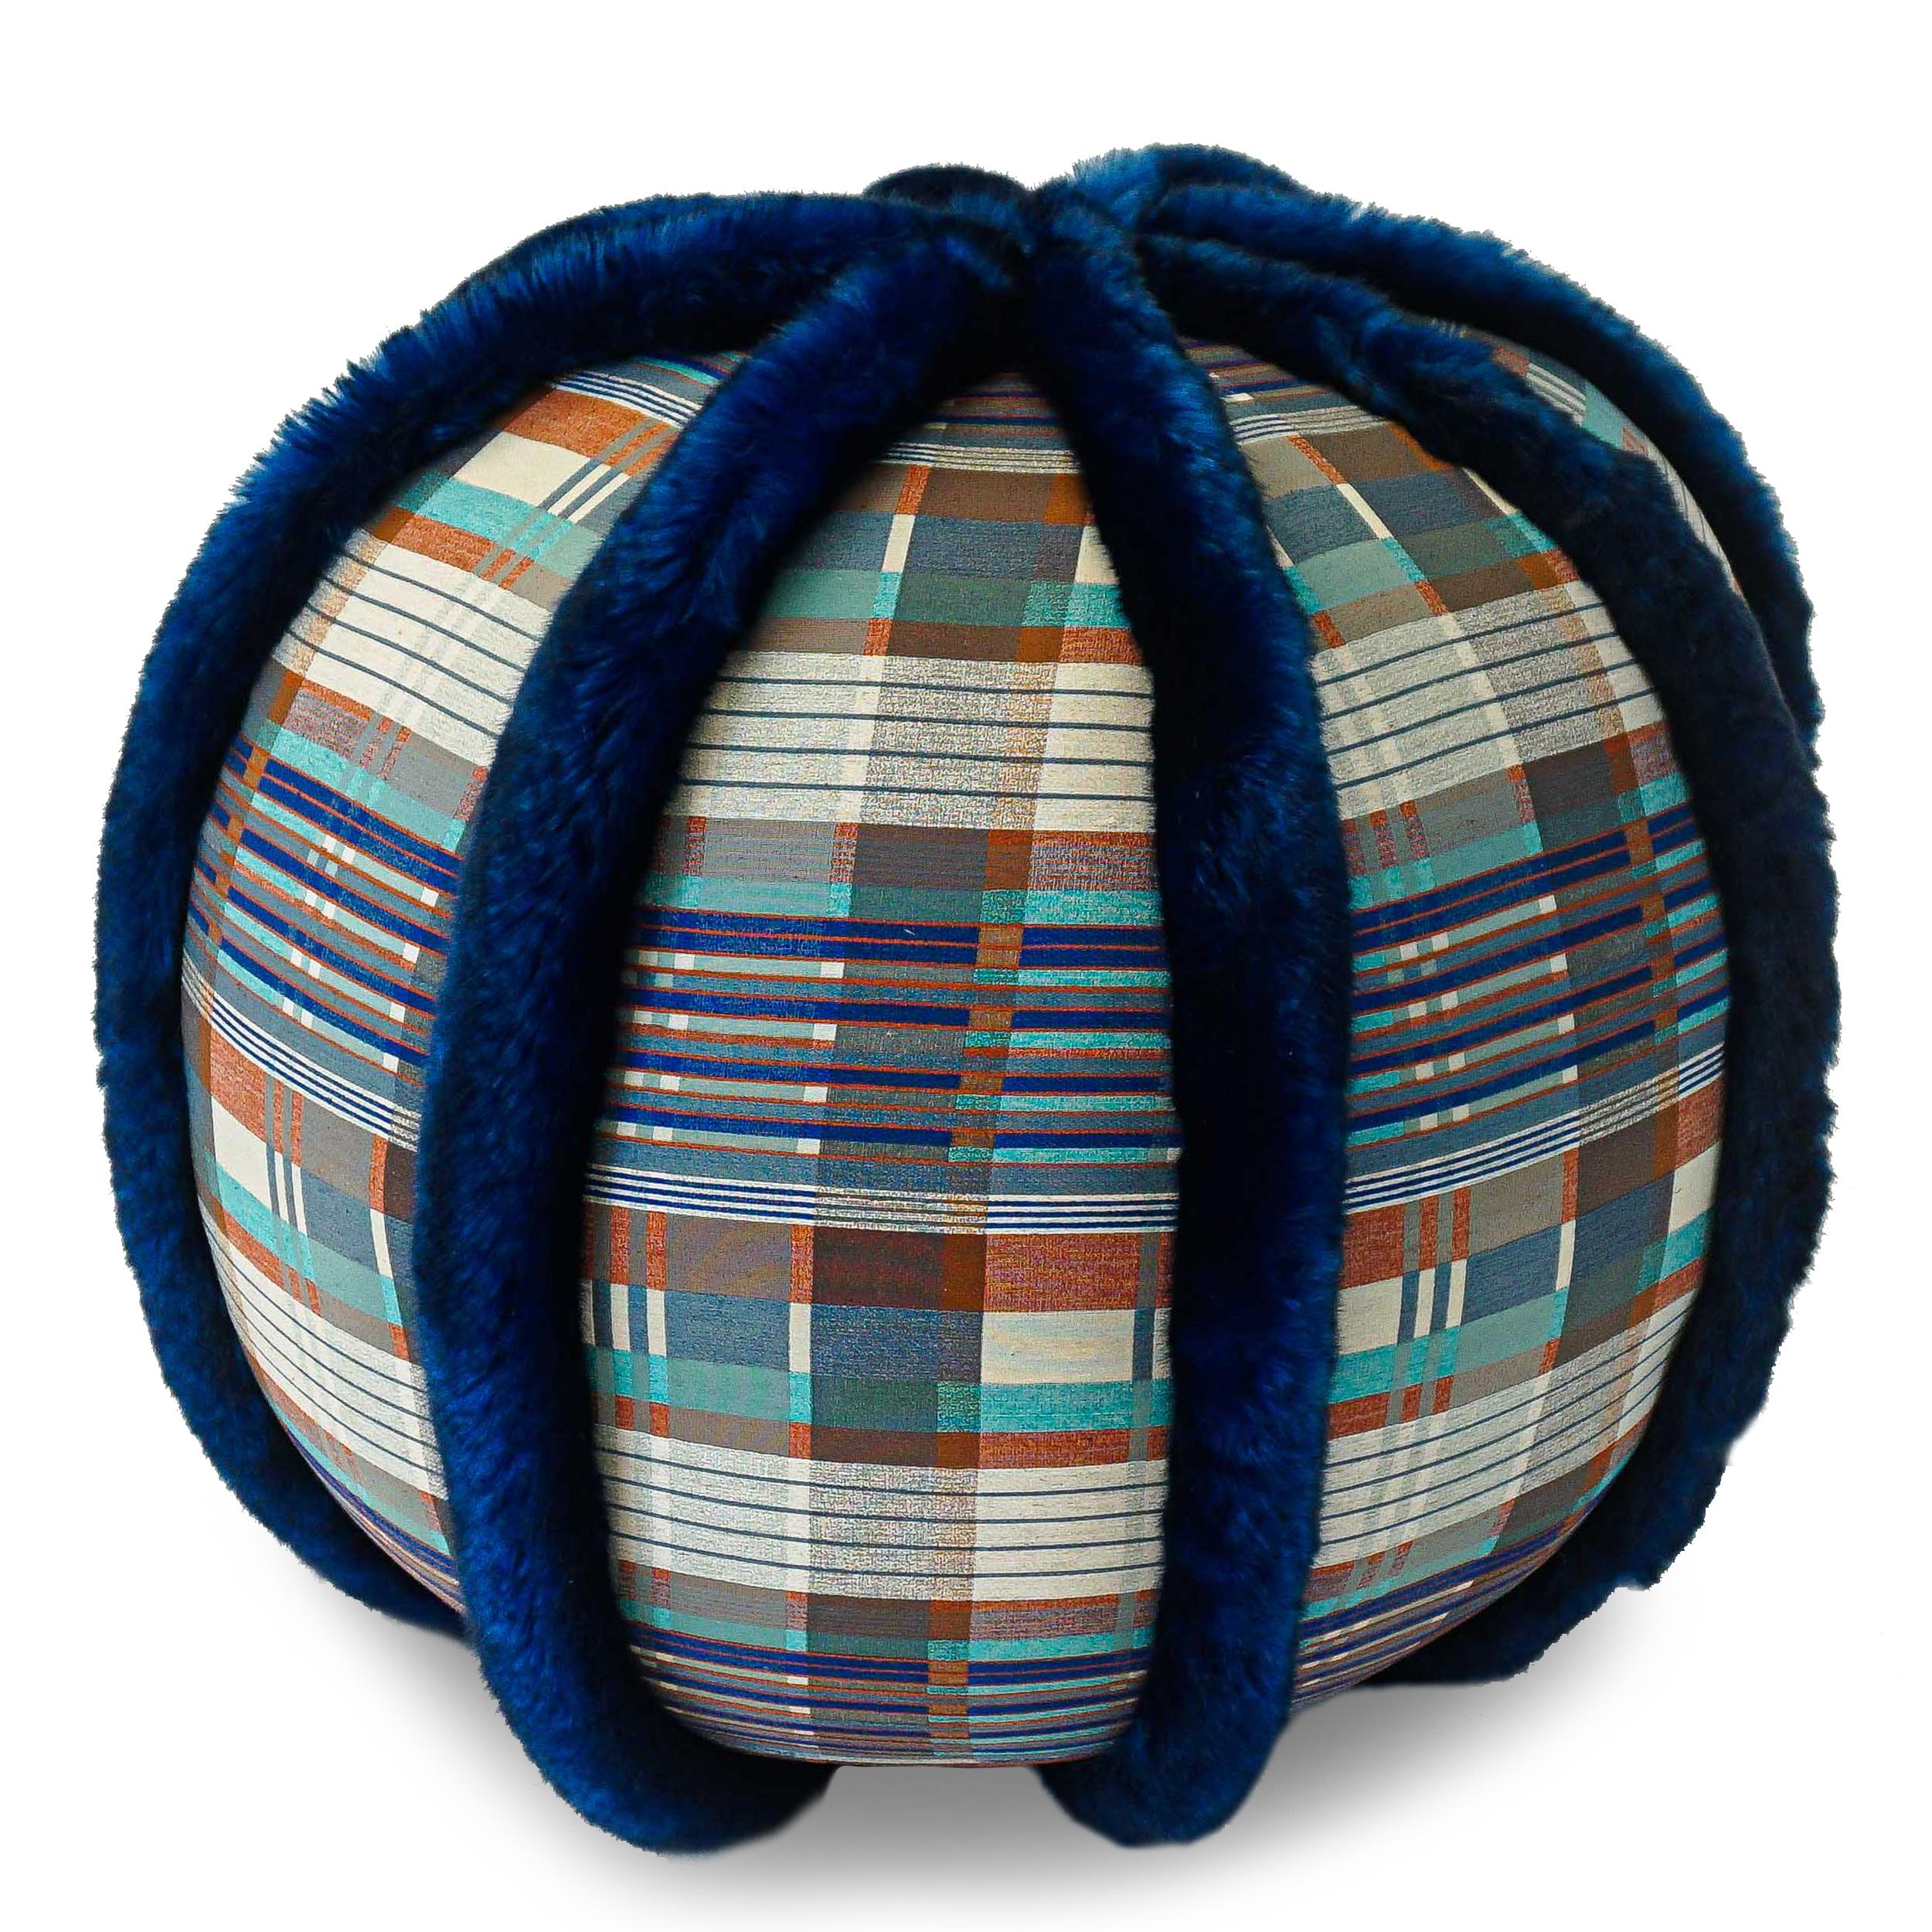 Dare we say, Prep-Nouveau? Rad Plaid handmade pouf/ottoman covered in vibrant blue Faux Fur & patterned Funky Plaid Fabric. Light-weight enough to move around as occasional seating without scratching floor, but substantial and firm enough to support